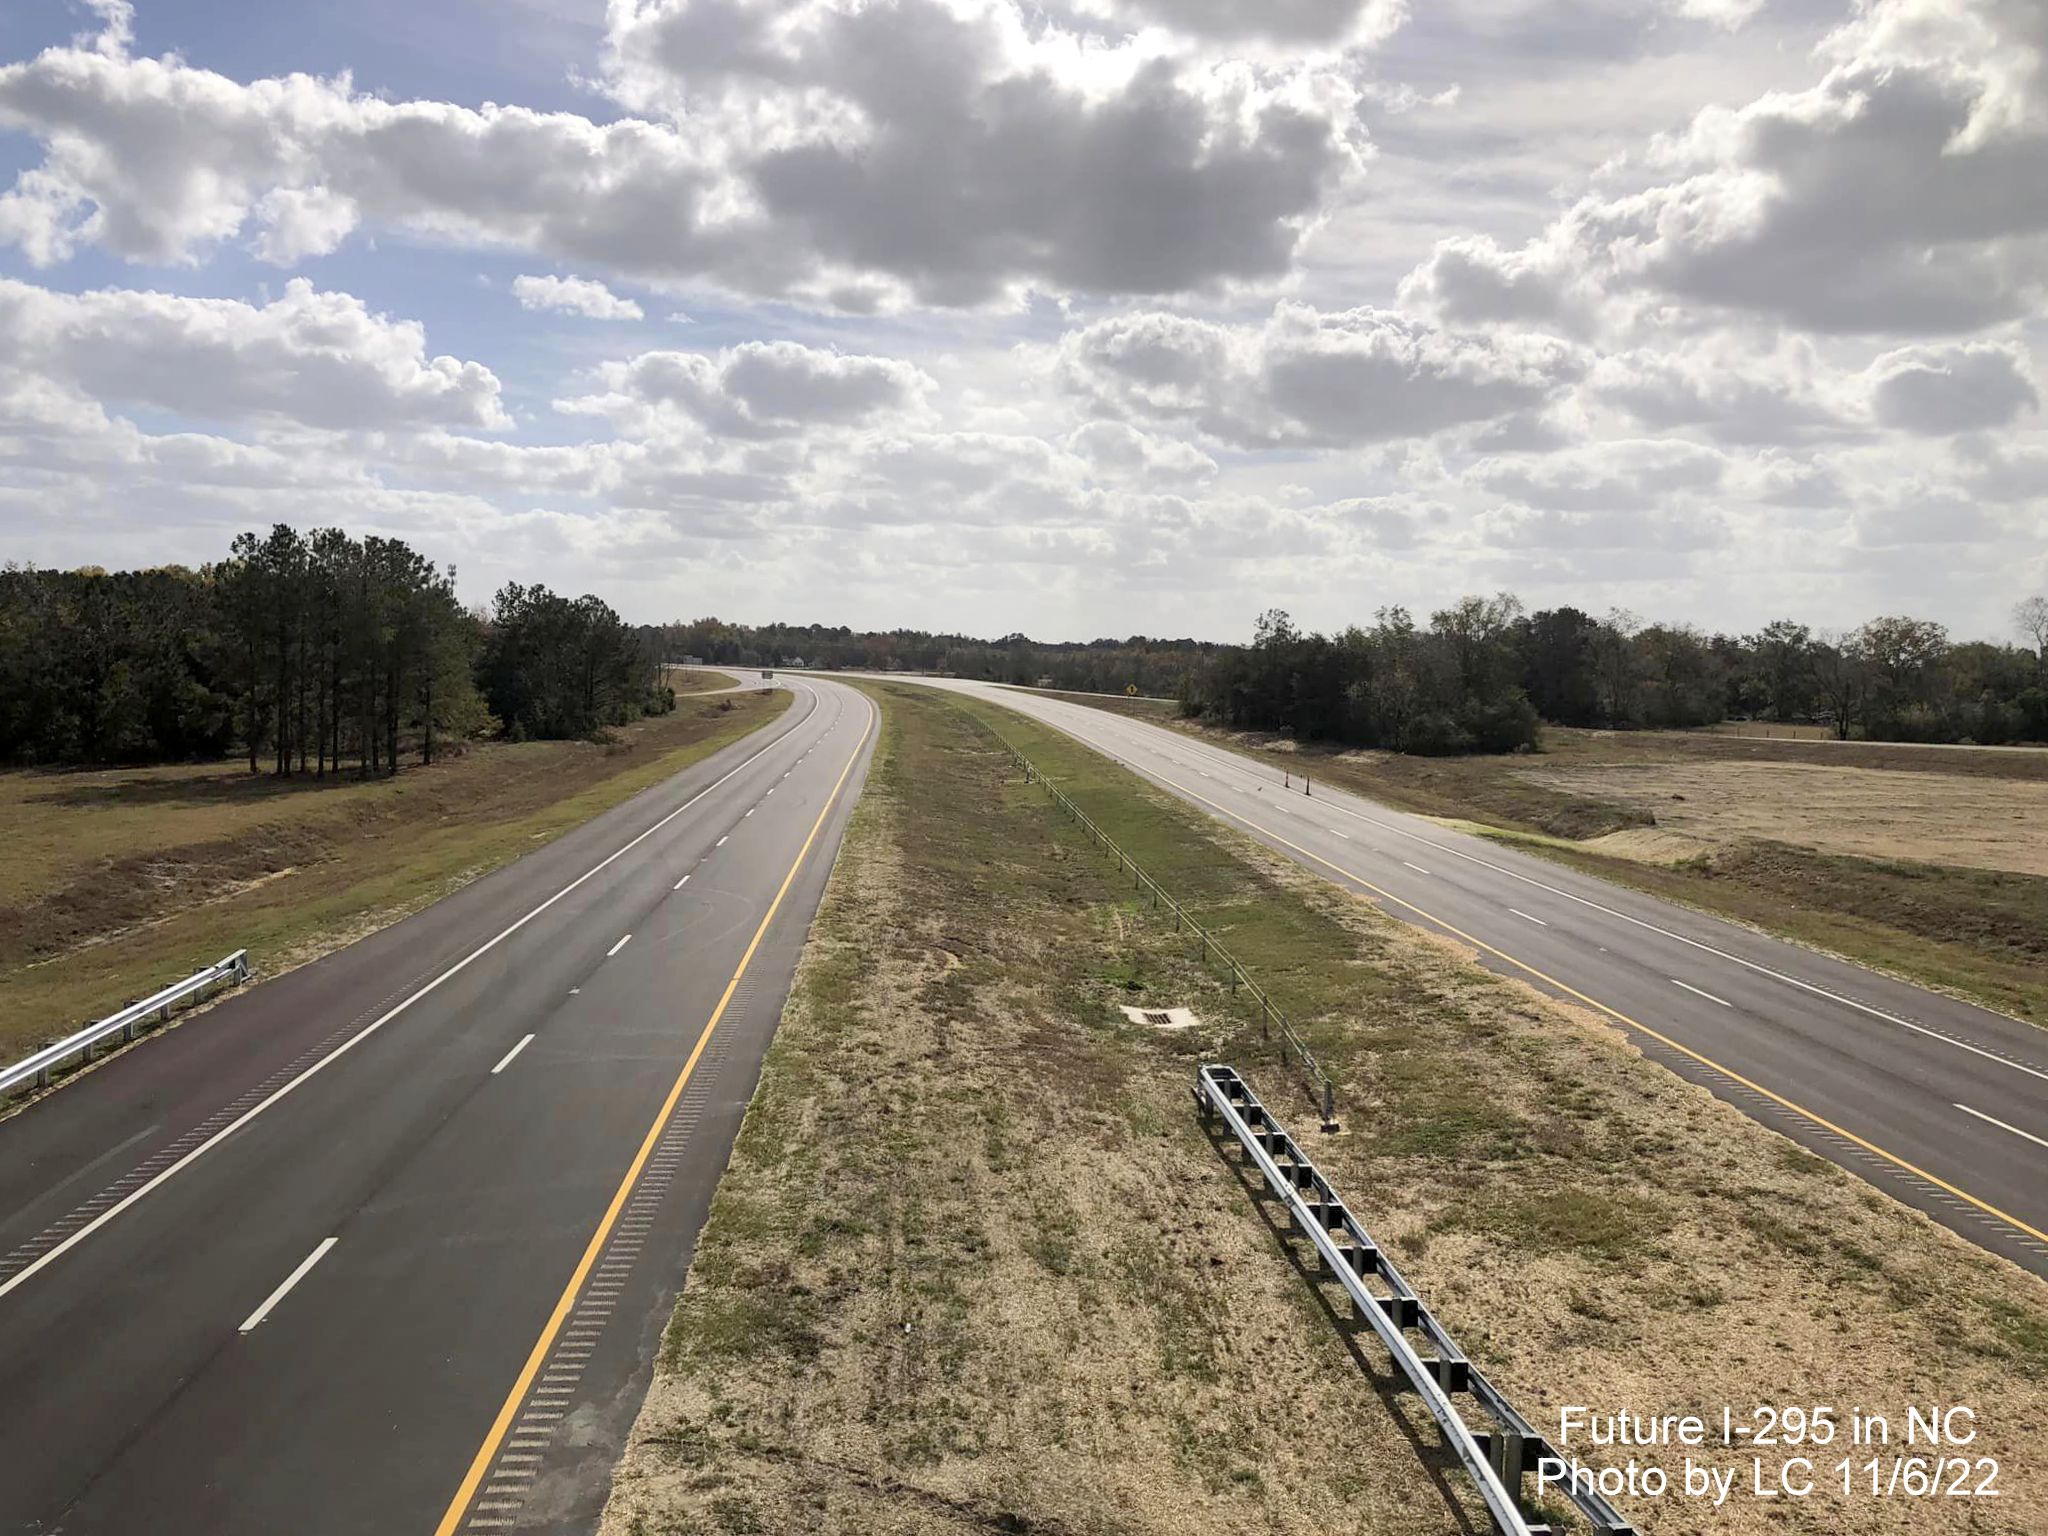 Image taken along Black Bridge Road bridge looking south to soon to
        be opened section of Fayetteville Outer Loop to Parkton/Leeper Roads, by LC, November 2022